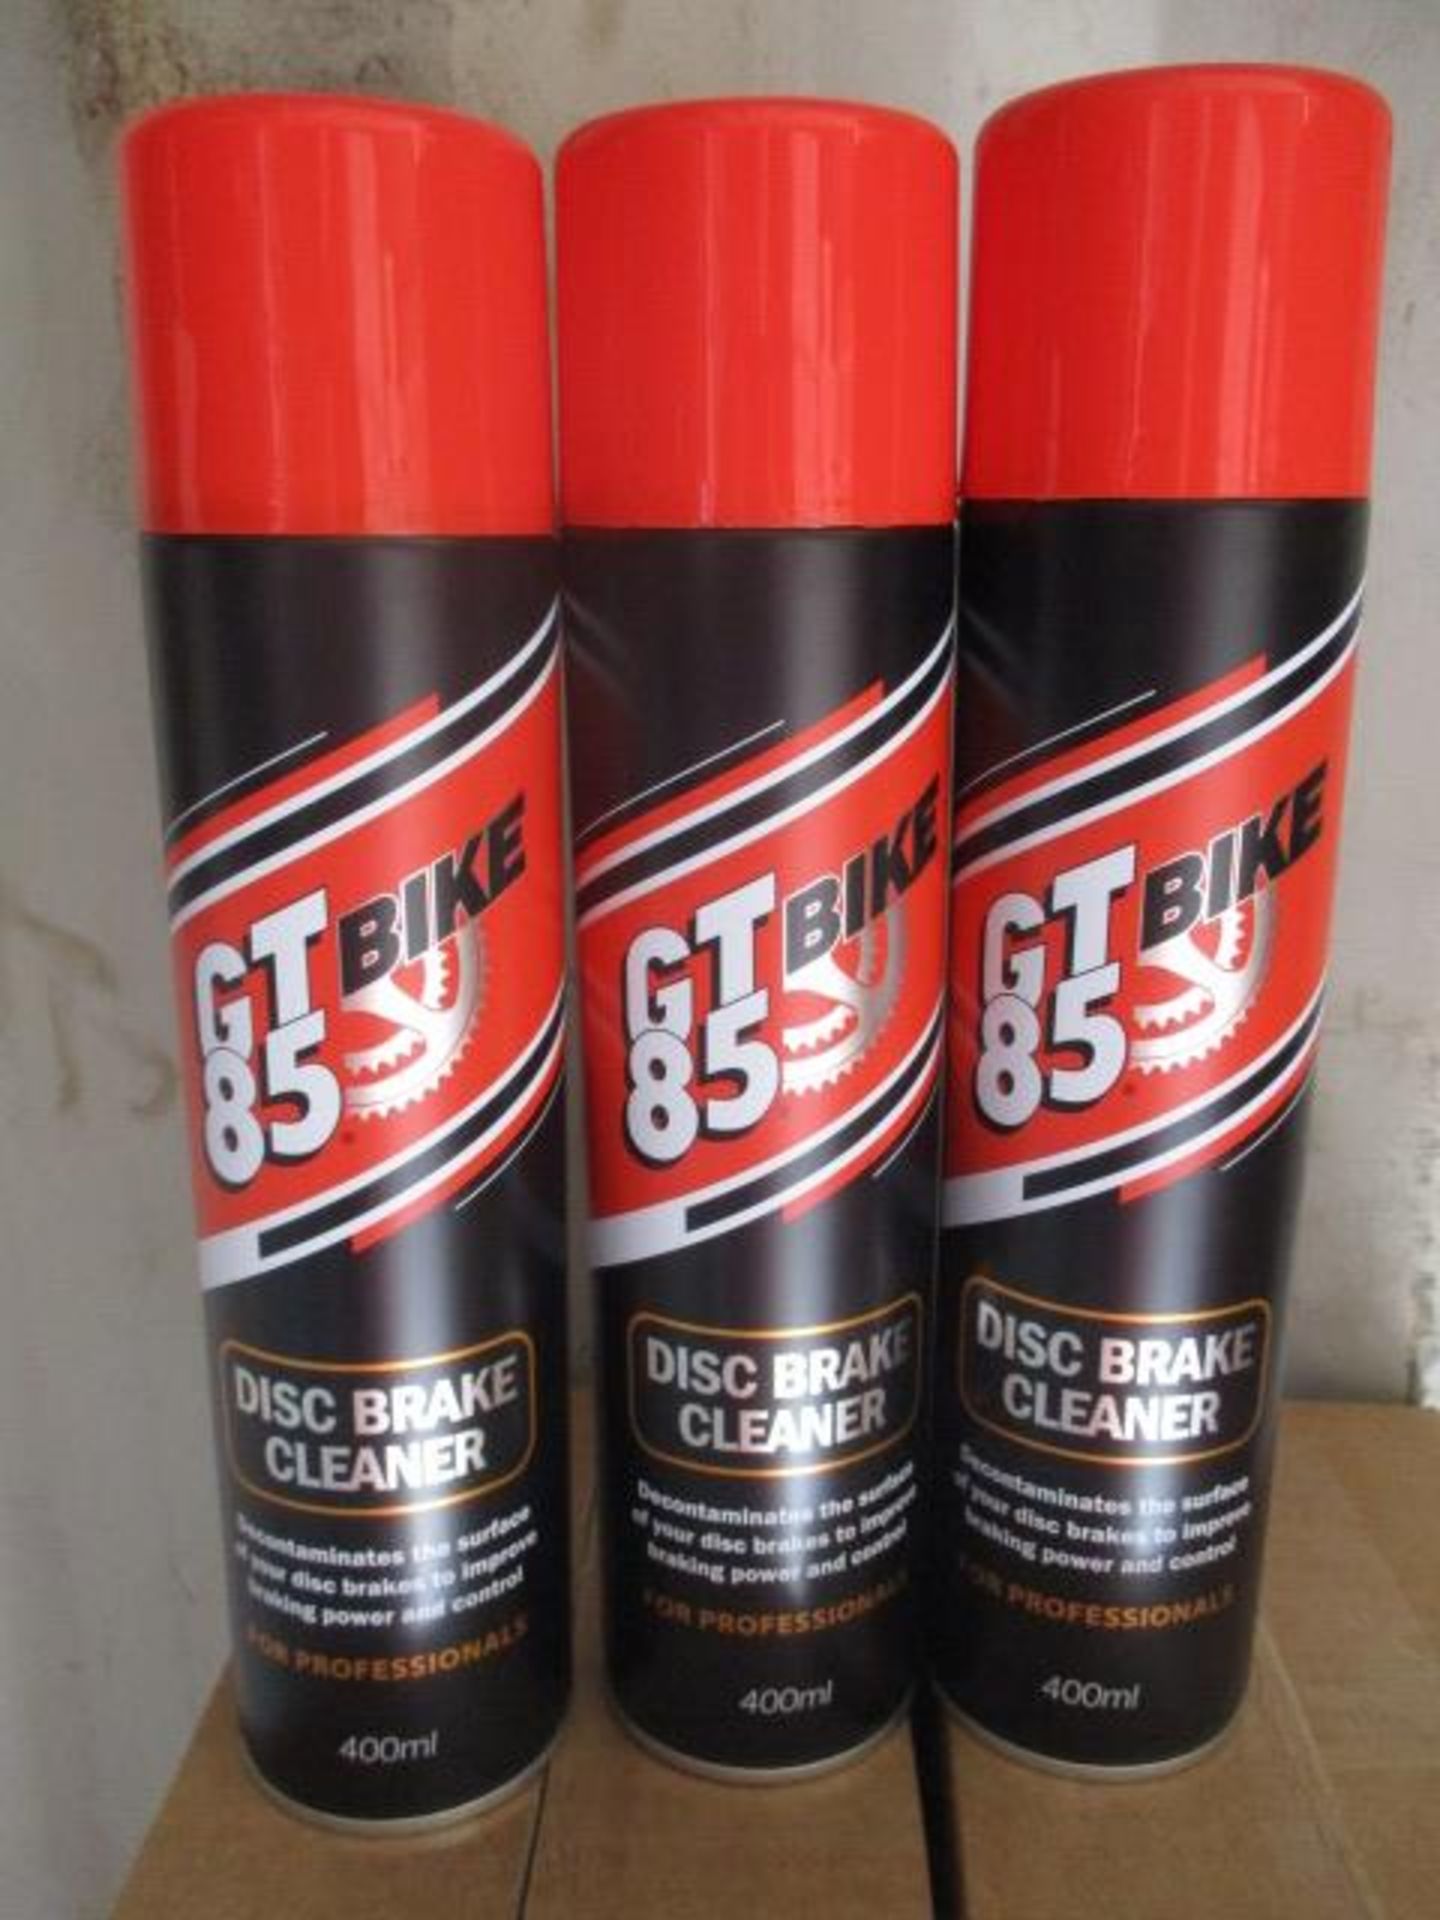 12pcs Brand new GT85 Disc Brake cleaner 400ml - brand new and sealed rrp £5.99 each - 12pcs in lot